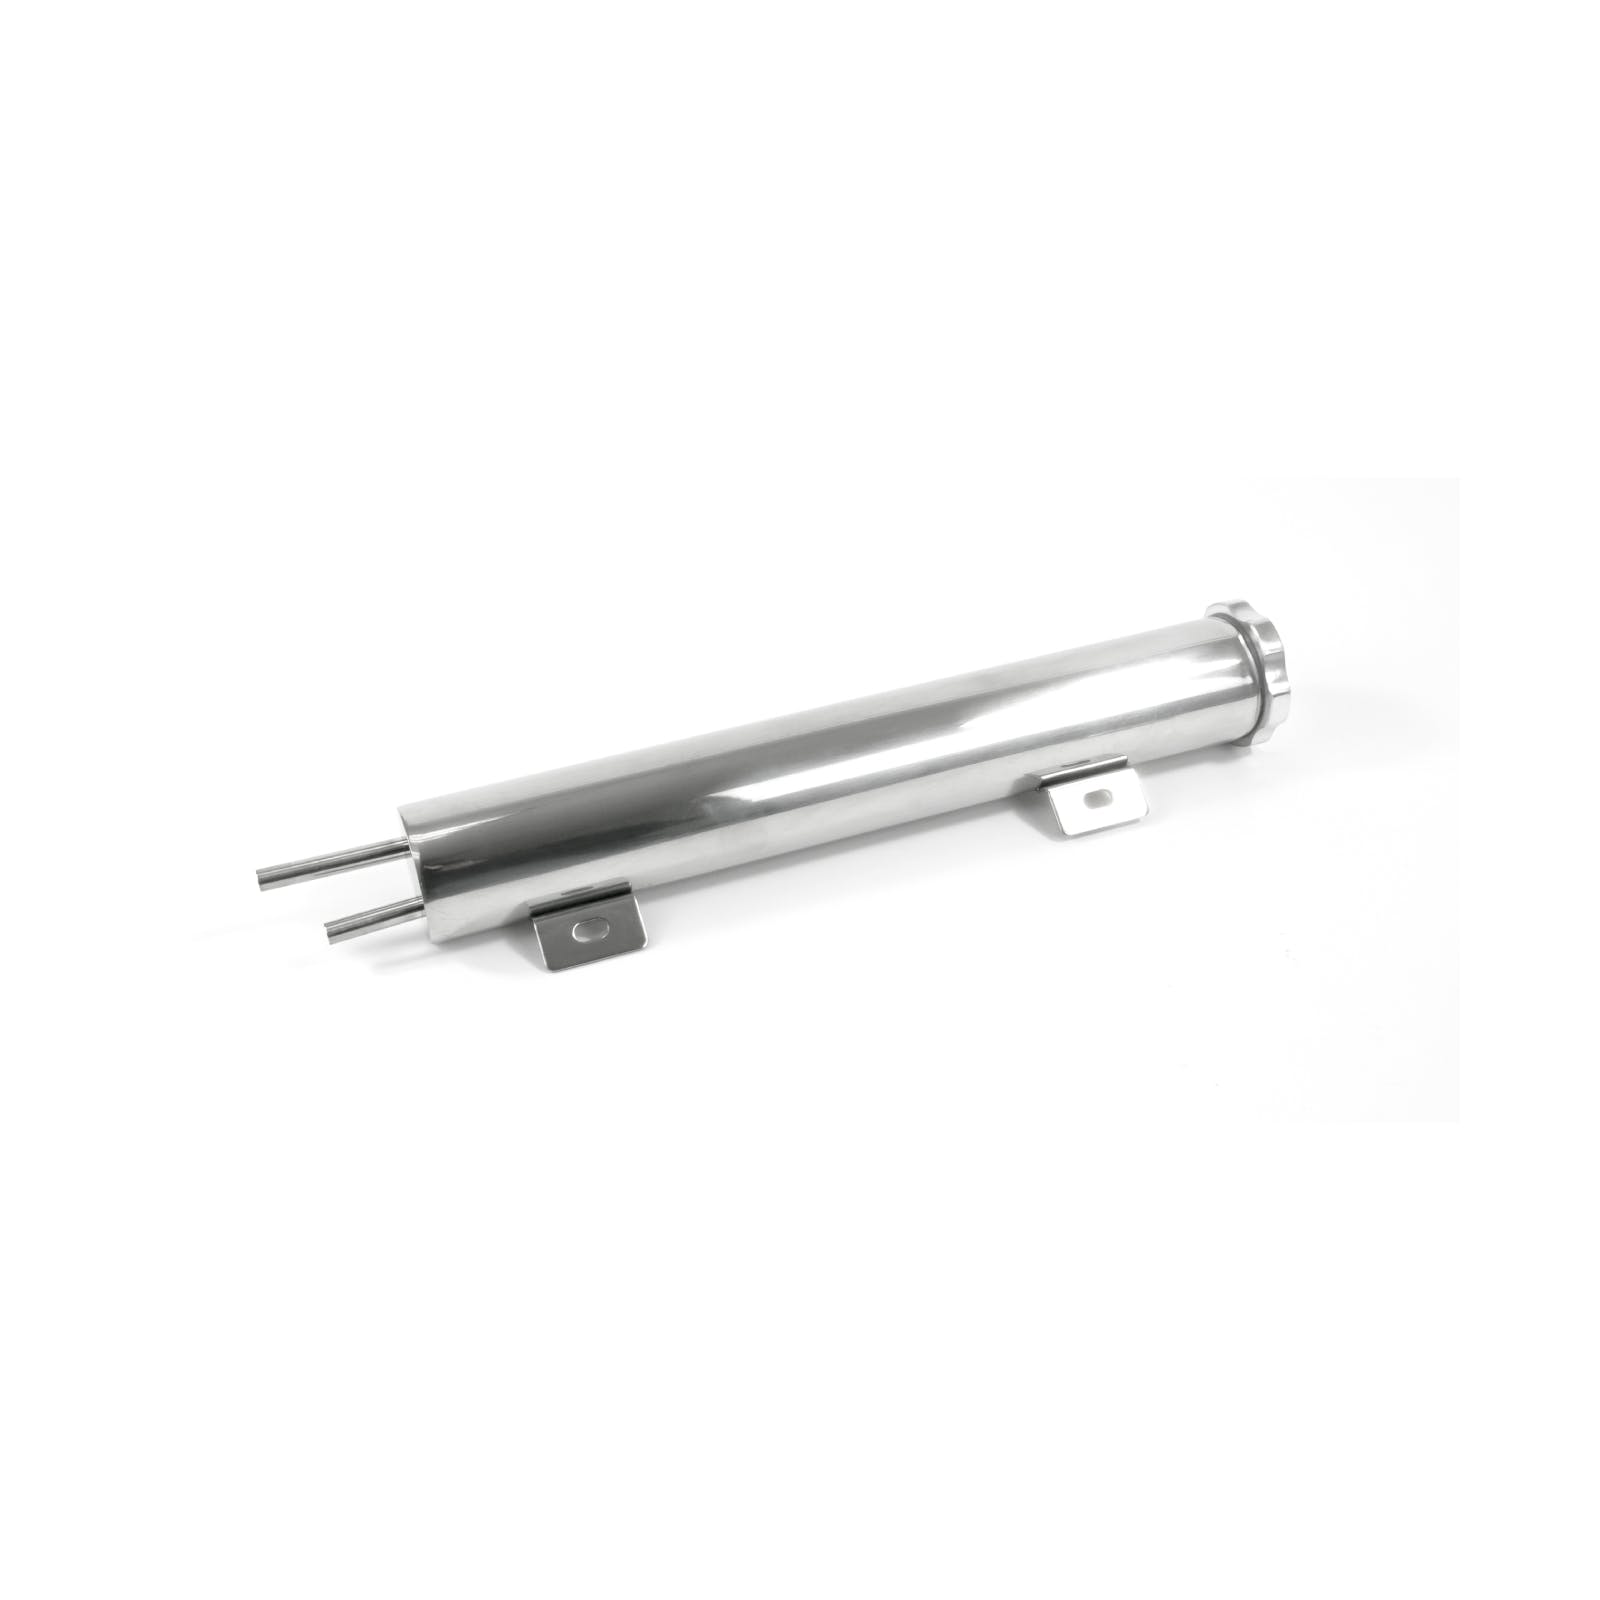 Top Street Performance HC6322 Stainless Steel Overflow Tank 2 inch x 13 inch